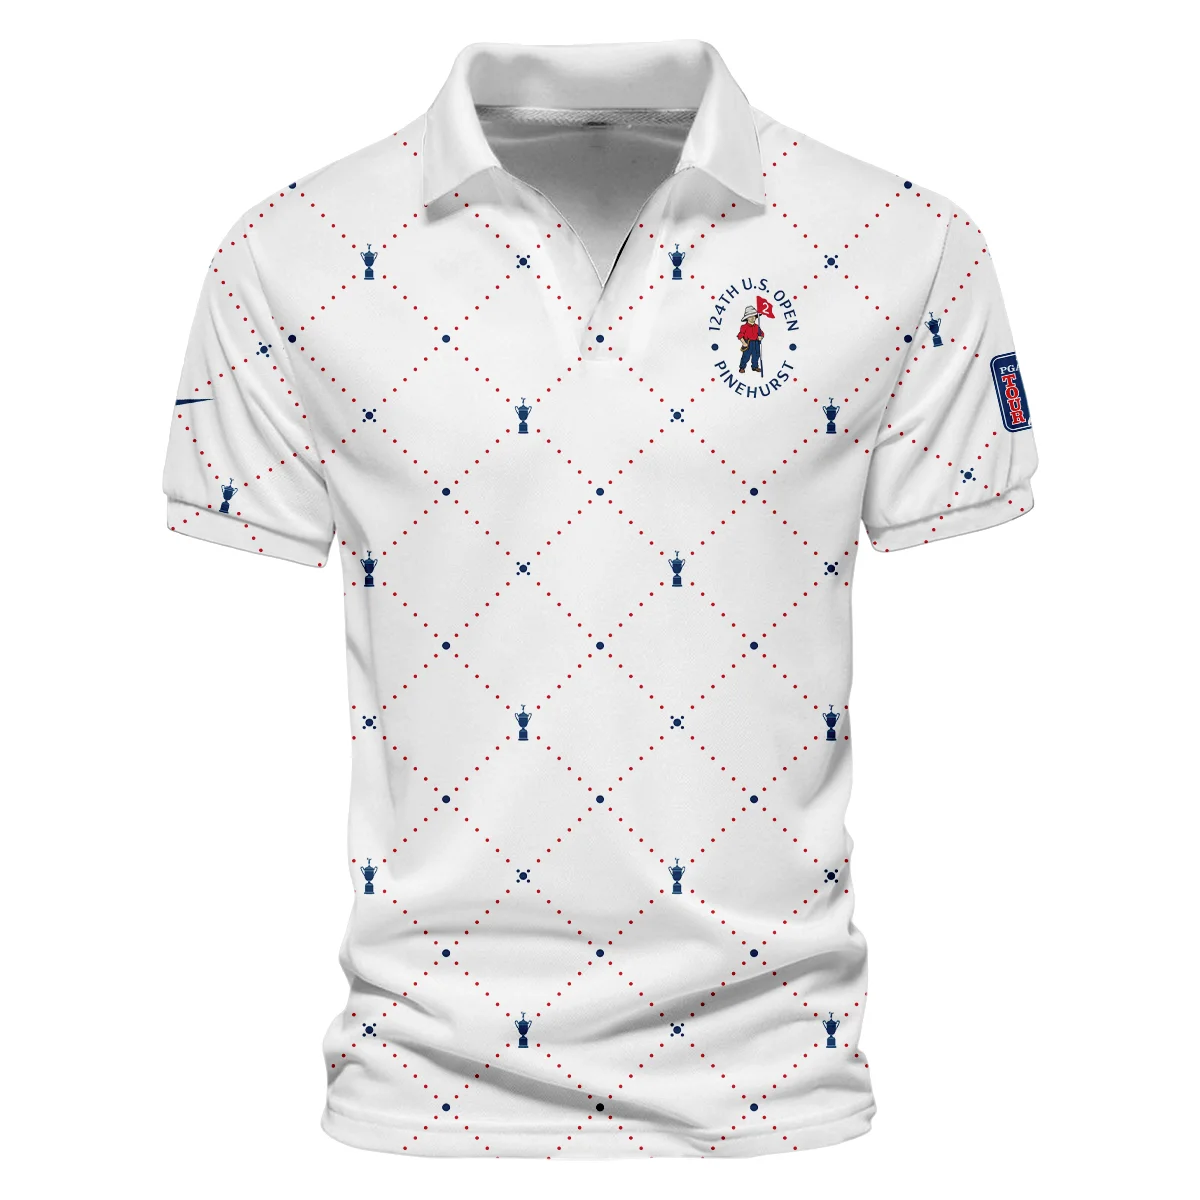 Argyle Pattern With Cup 124th U.S. Open Pinehurst Nike Style Classic, Short Sleeve Polo Shirts Quarter-Zip Casual Slim Fit Mock Neck Basic